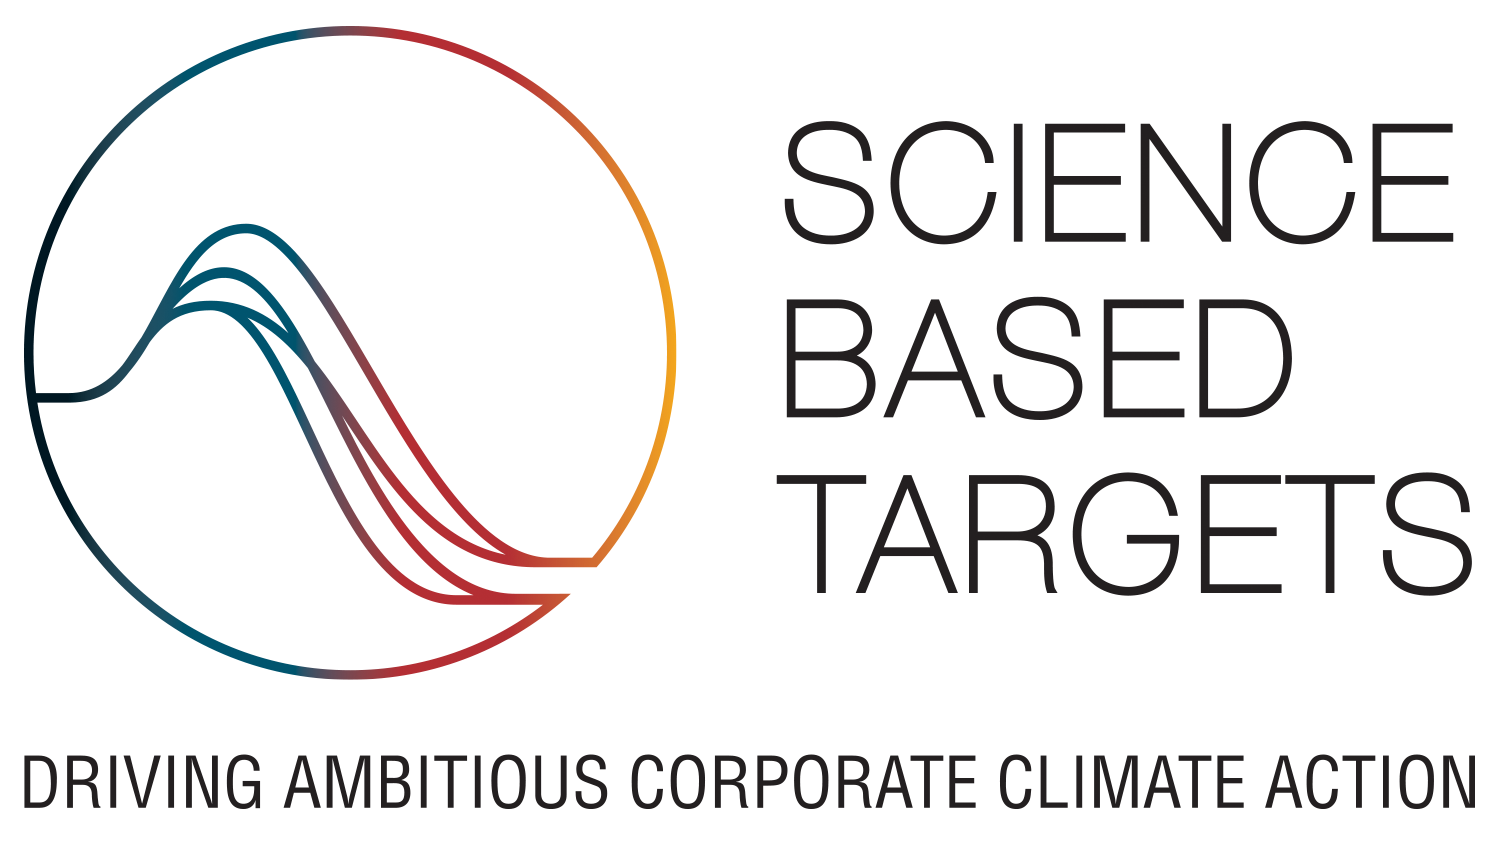 Sanoma’s climate targets approved by the Science Based Targets initiative